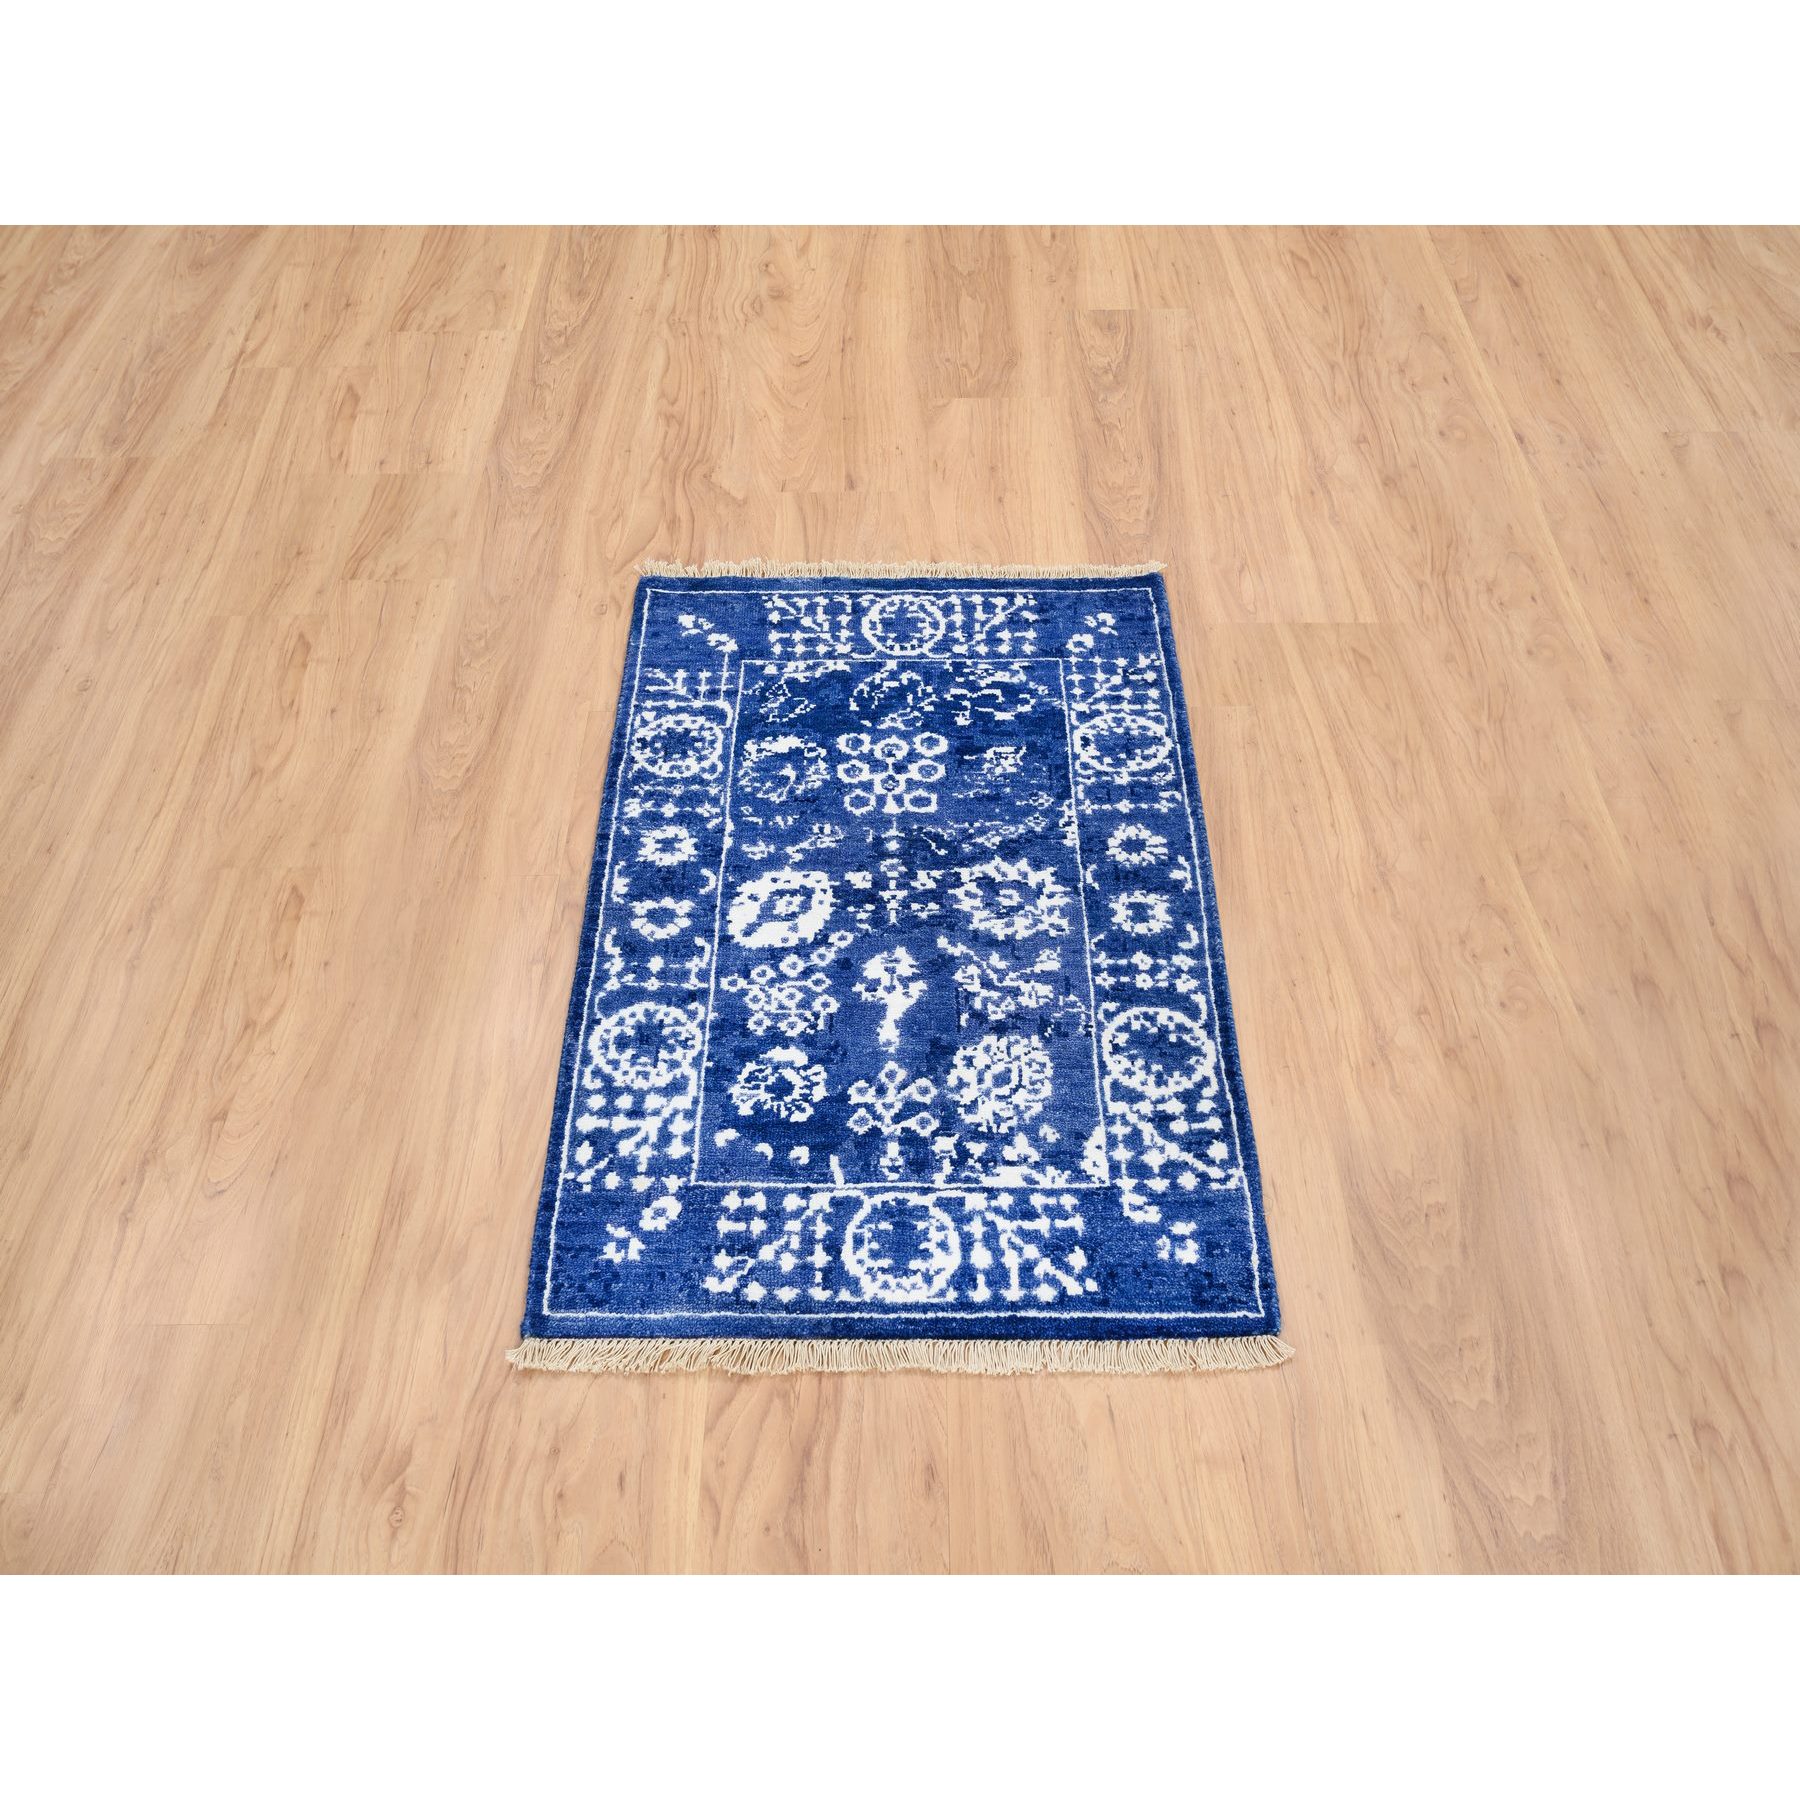 2'1"x3' Denim Blue, Wool and Silk Hand Woven, Tabriz with All Over Motifs Tone on Tone, Mat Oriental Rug 